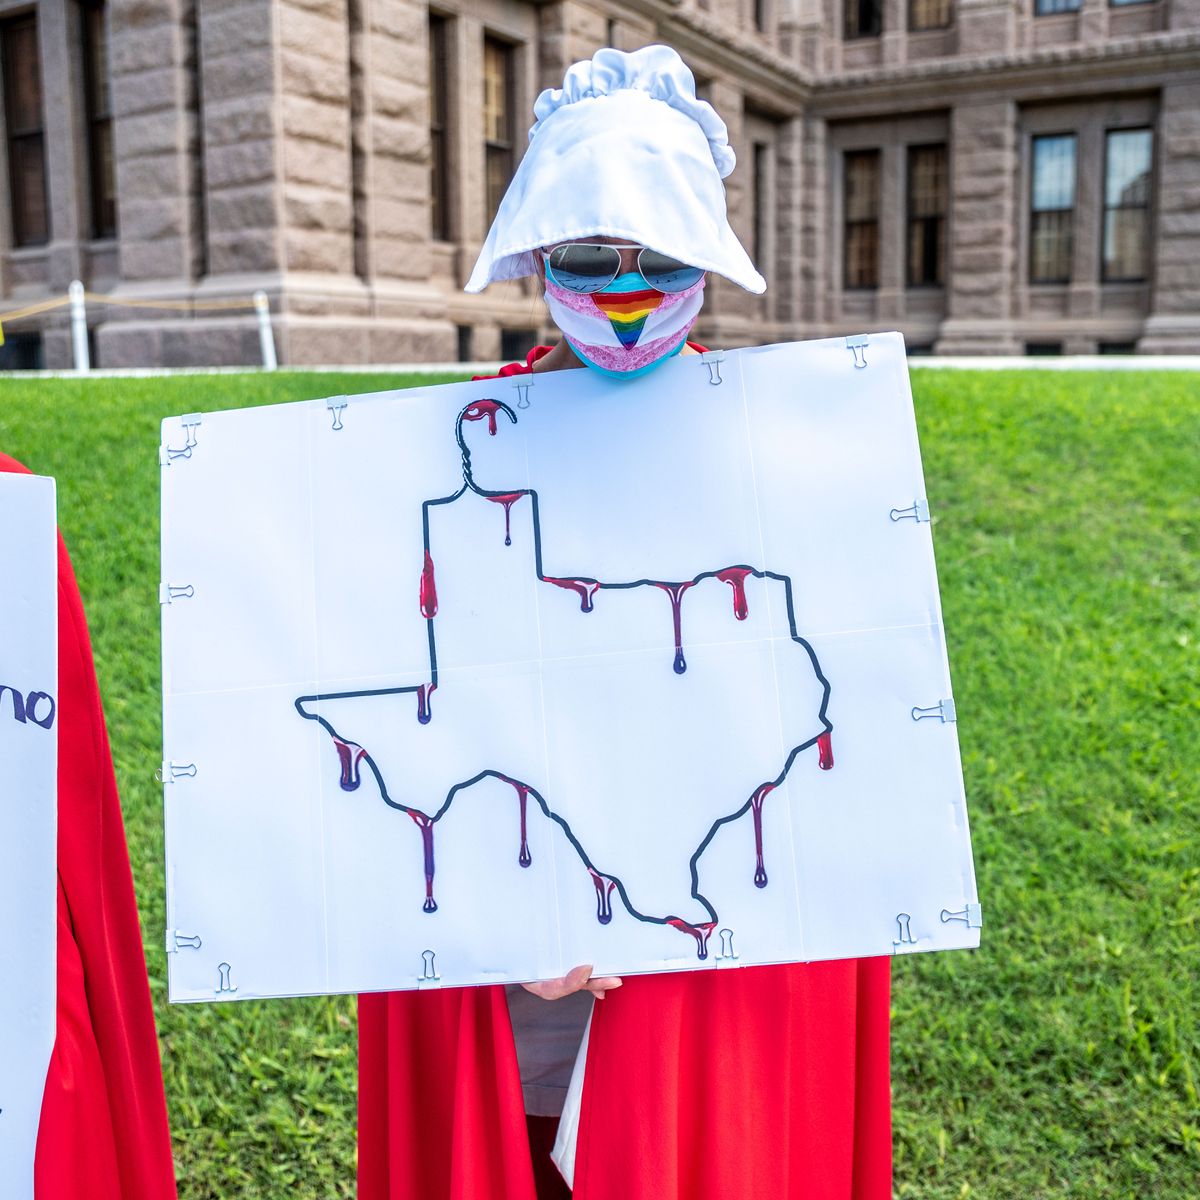 Texas 6-Week Abortion Ban Takes Effect: Will Anyone Stop It?